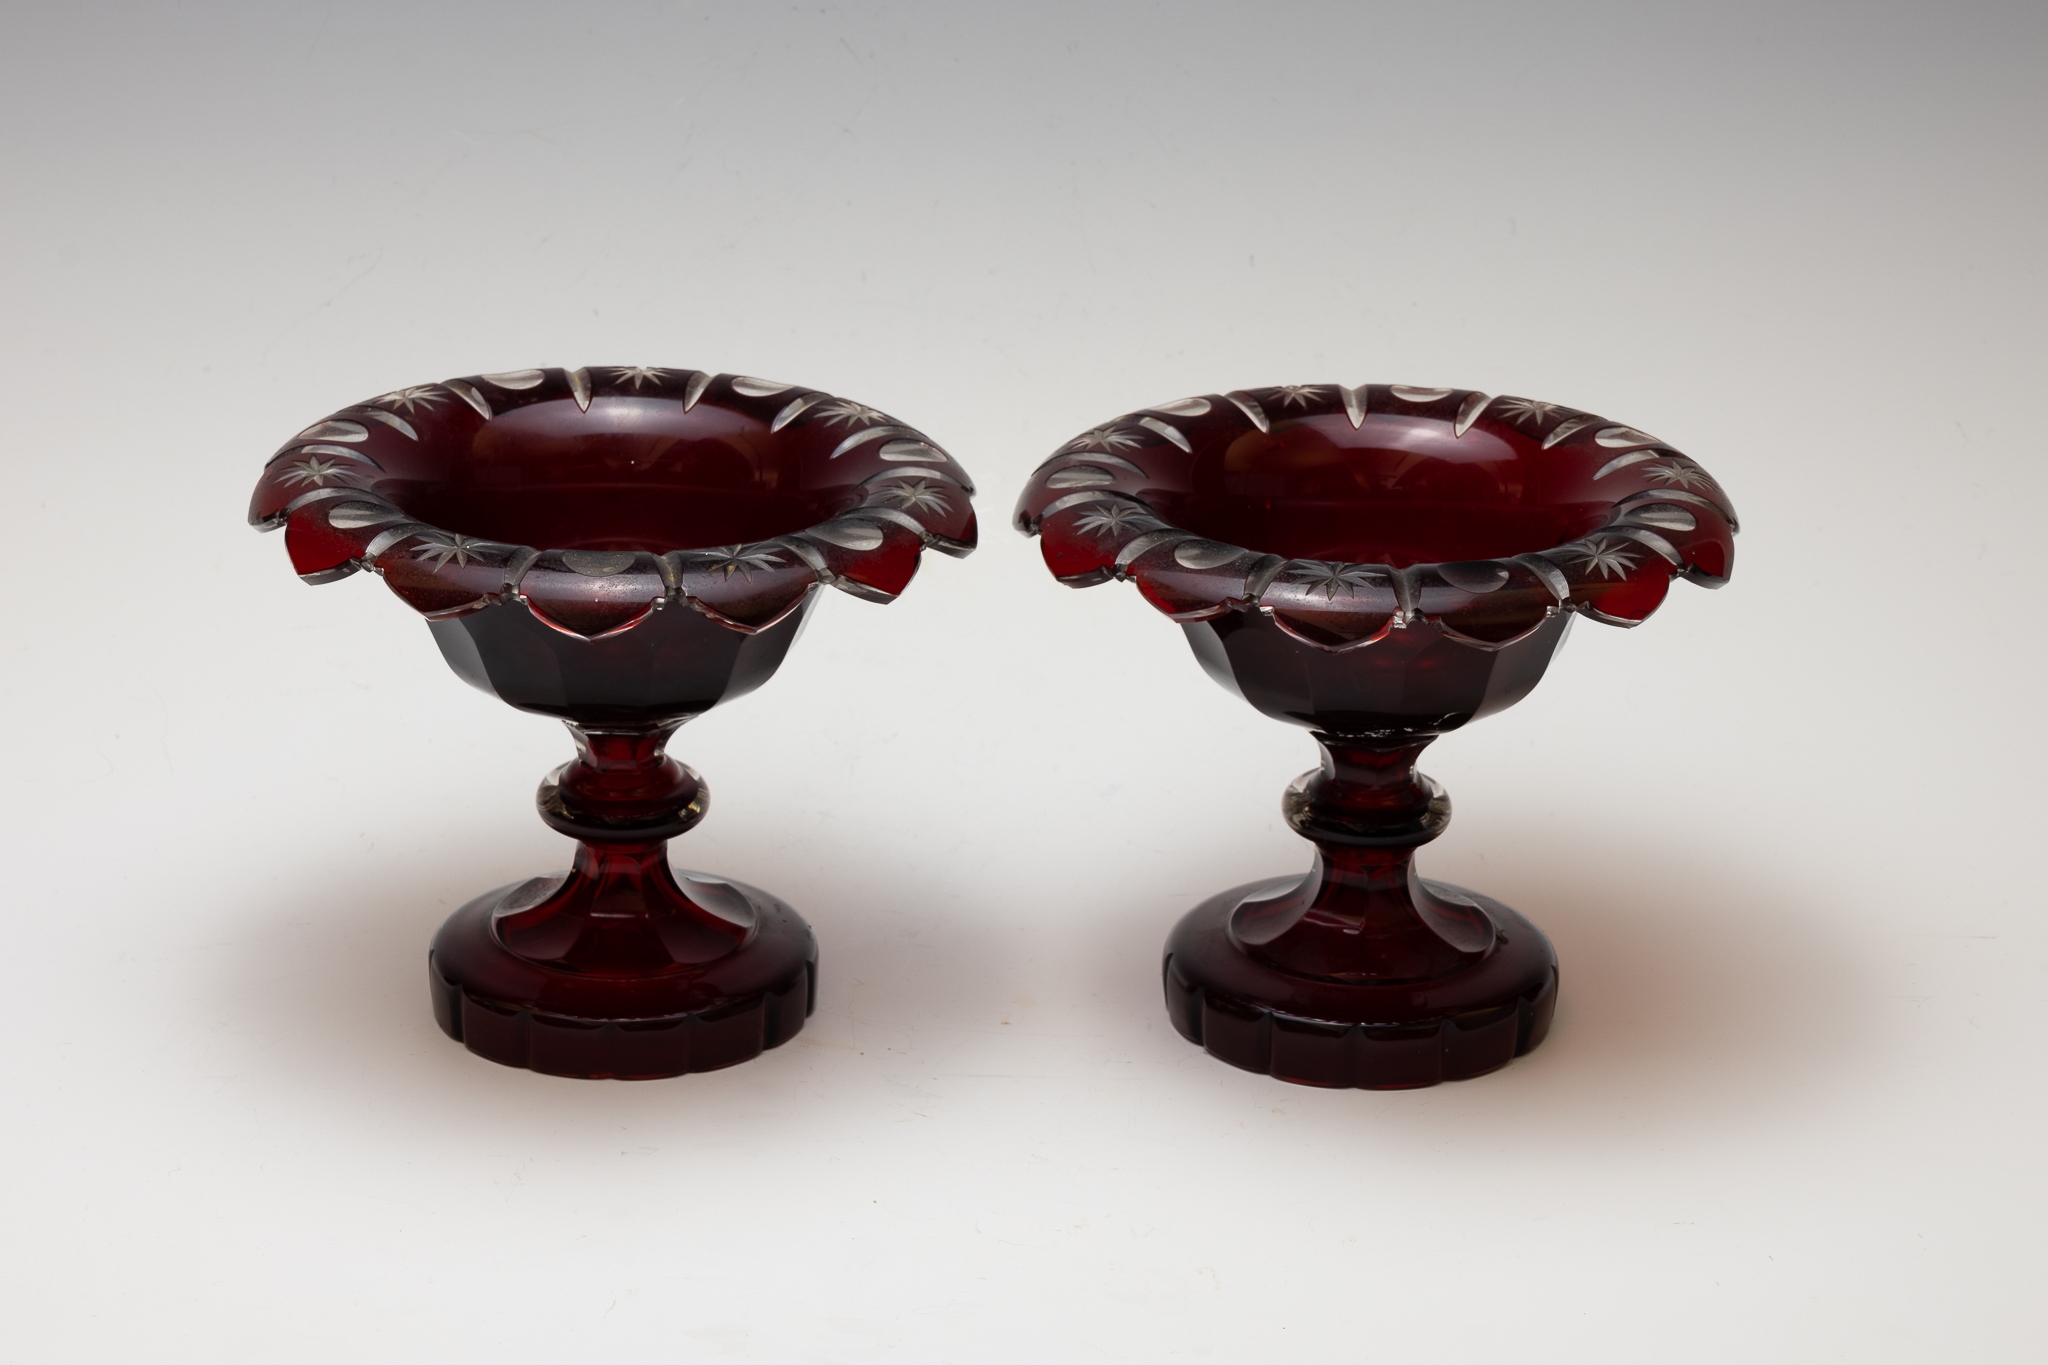 A Pair of Antique Bohemian Ruby Red Glass Tazza Bowl from the 19th Century.

H: Approximately 15cm 